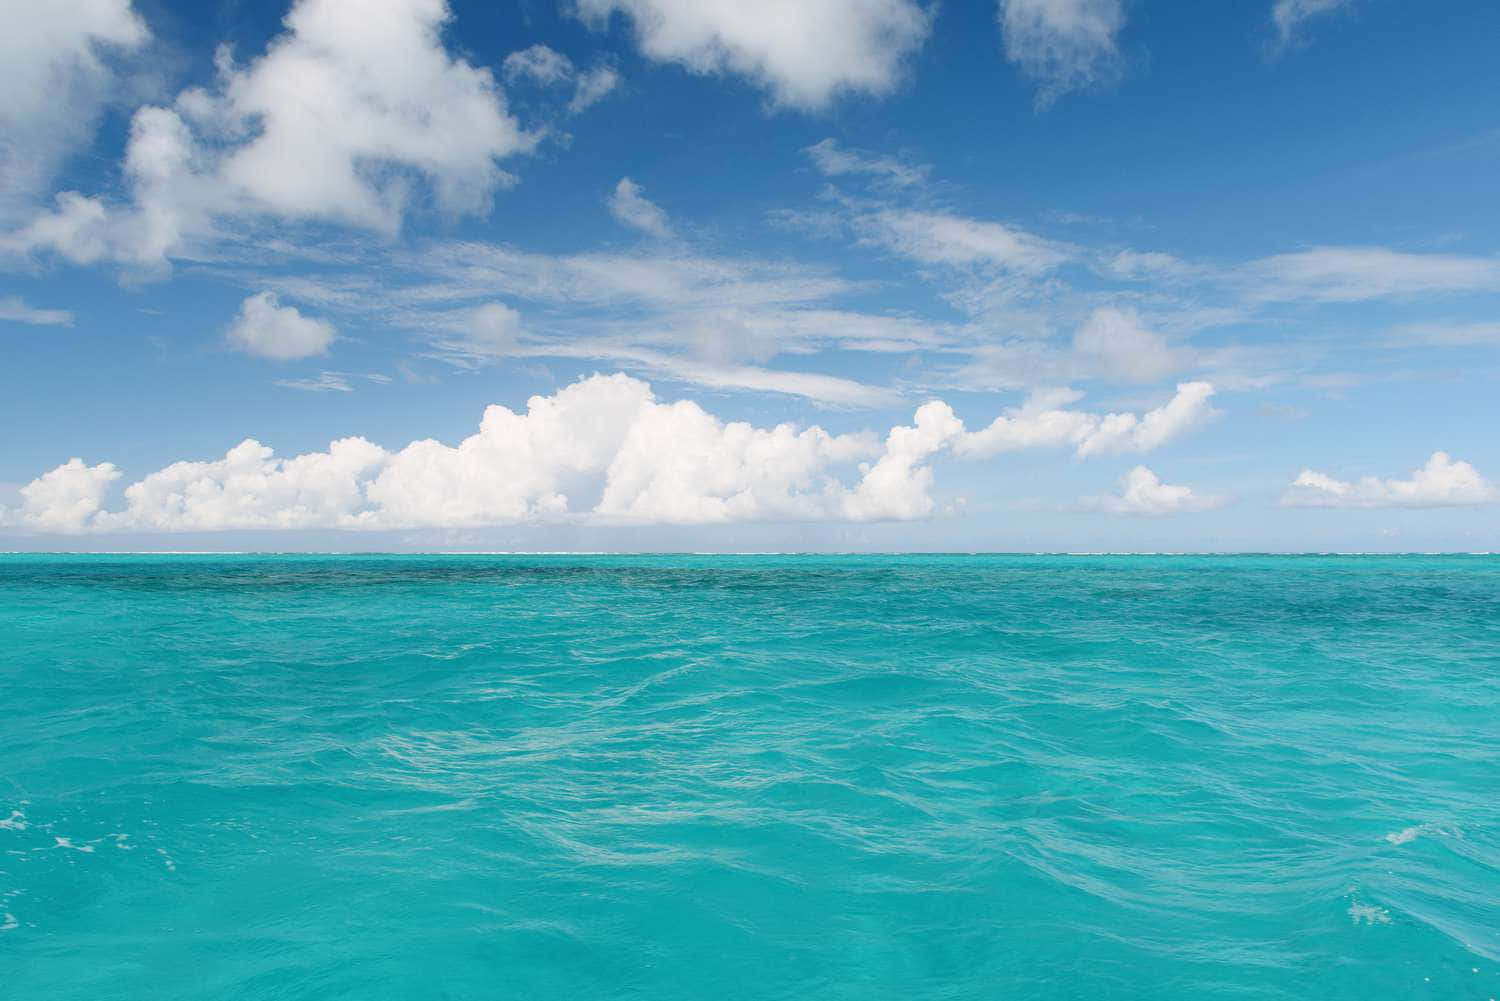 An amazing view of the deep blue ocean perfect for your next wallpaper.